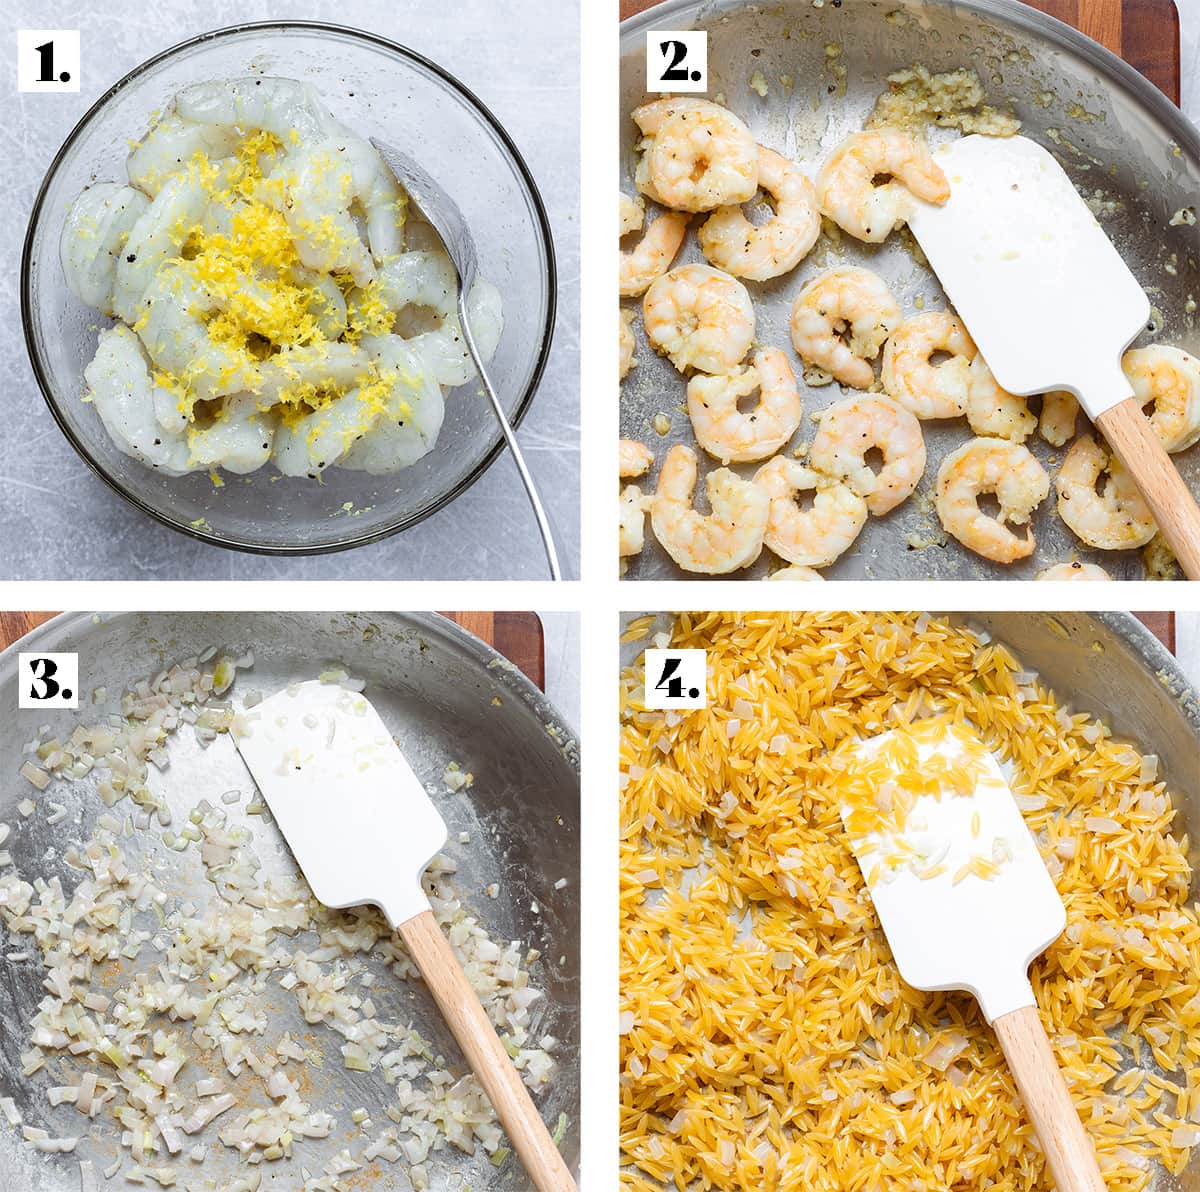 Step by step how to toss shrimp with spices and cook them on a pan along with shallots and orzo.